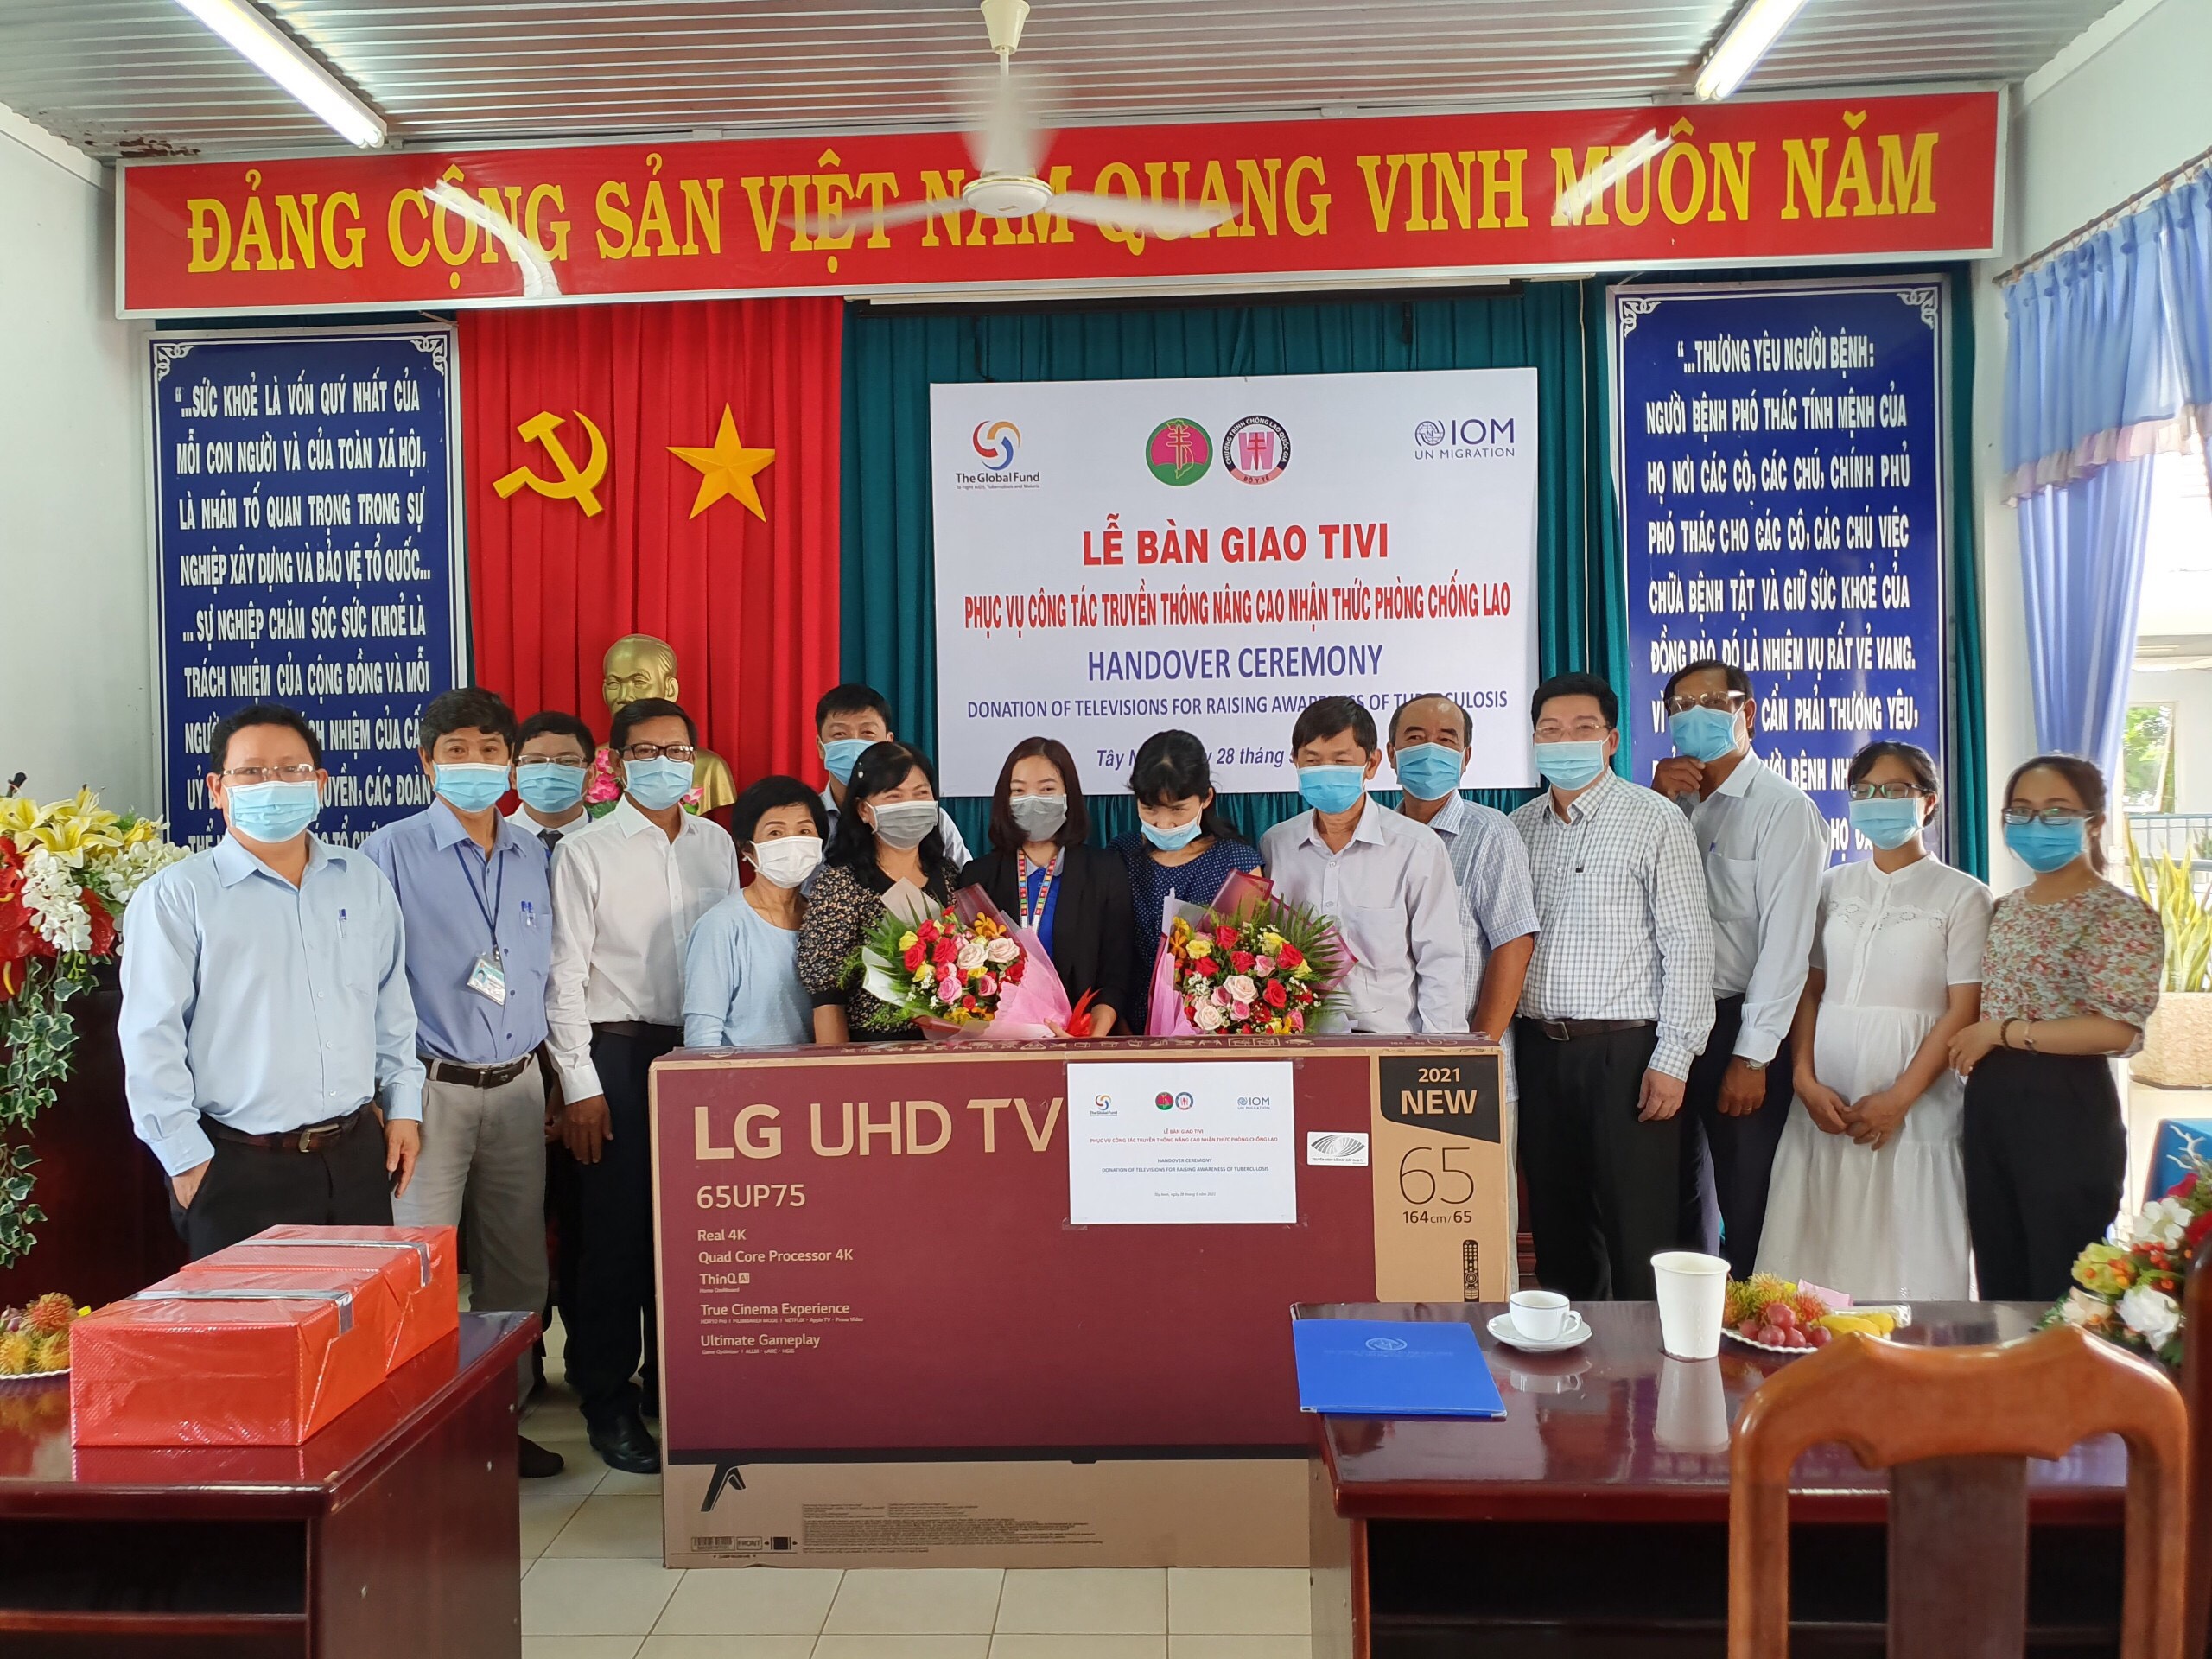 Public health officials presented a television donated by IOM in Tay Ninh. Photo by Lung Hospital in Tay Ninh. IOM donated 55 televisions to An Giang and Tay Ninh provinces.